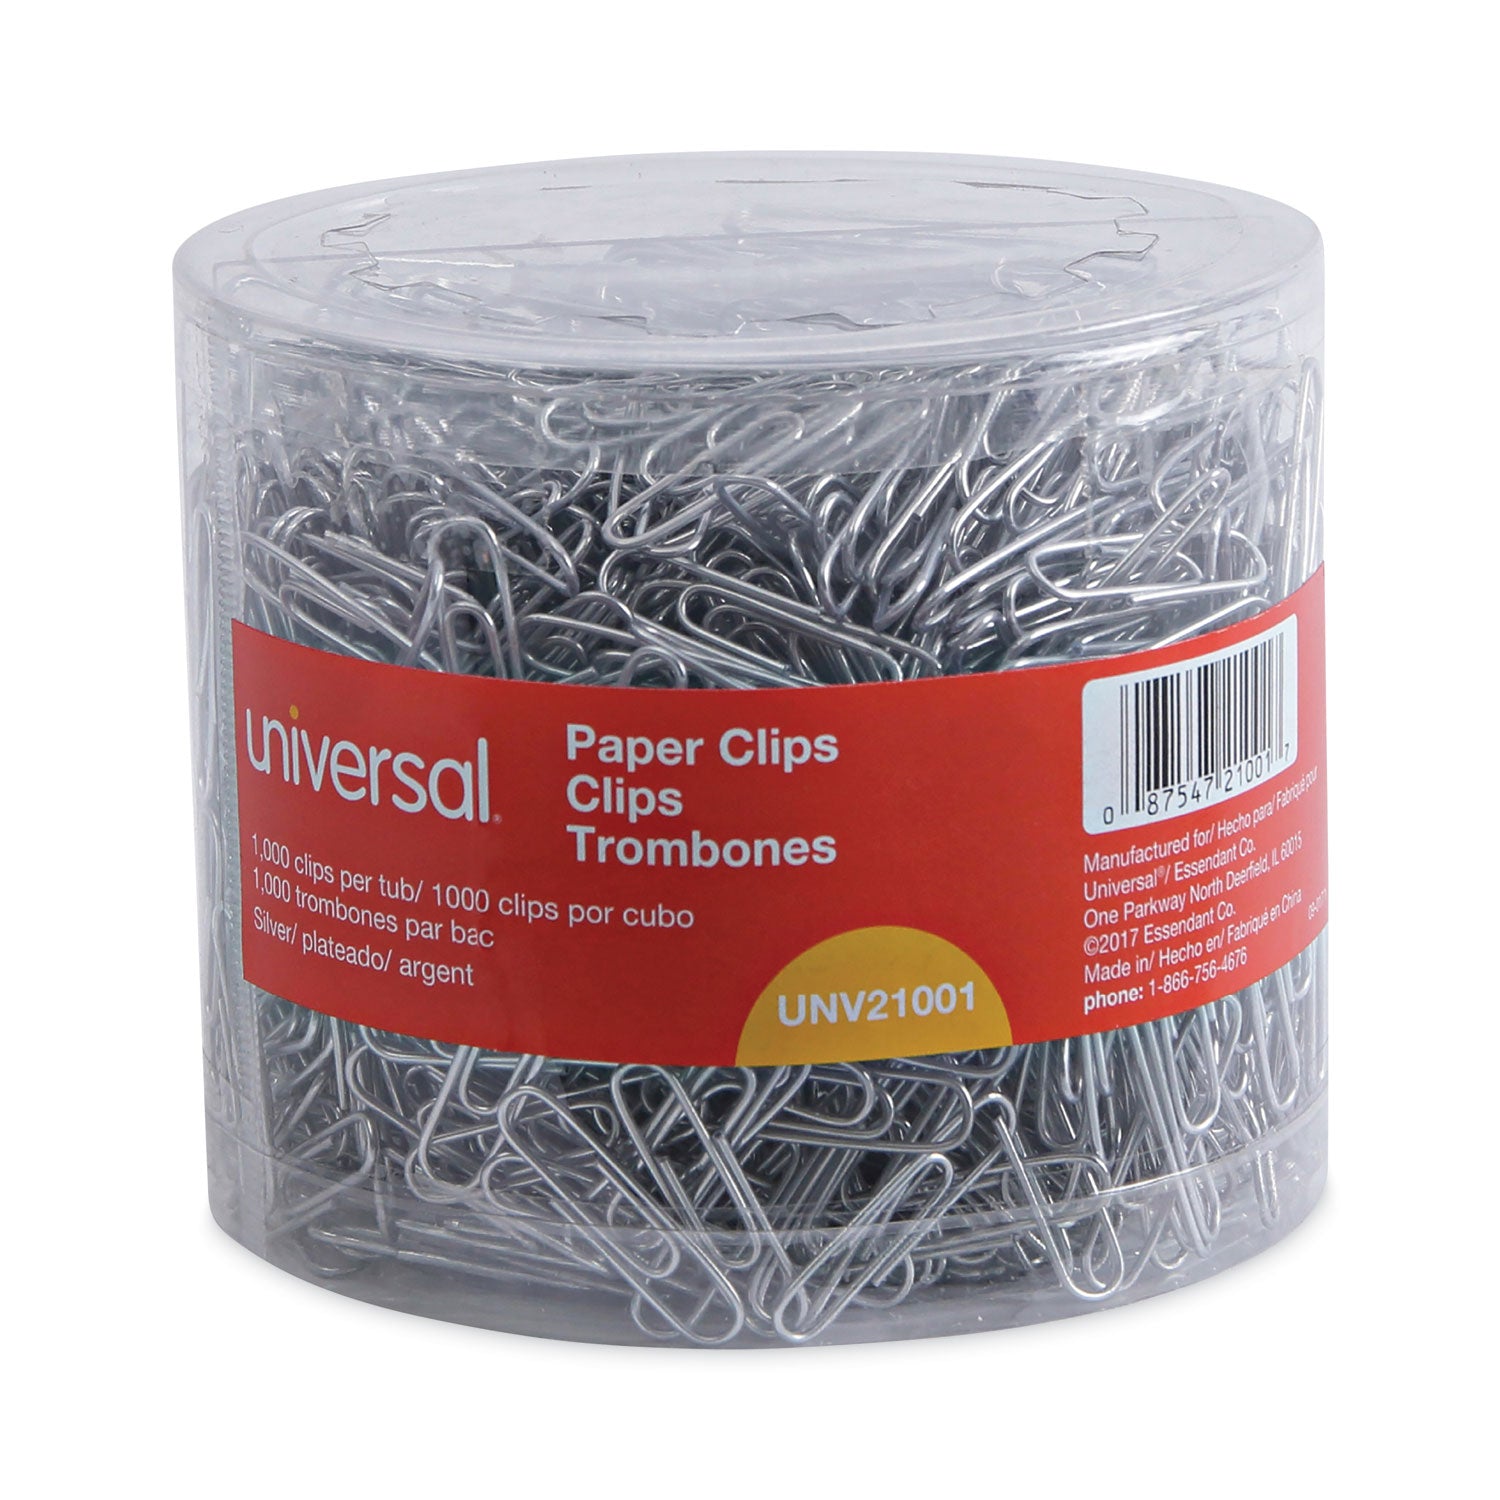 plastic-coated-paper-clips-with-two-compartment-dispenser-tub-750-#2-clips-250-jumbo-clips-silver_unv21001 - 2